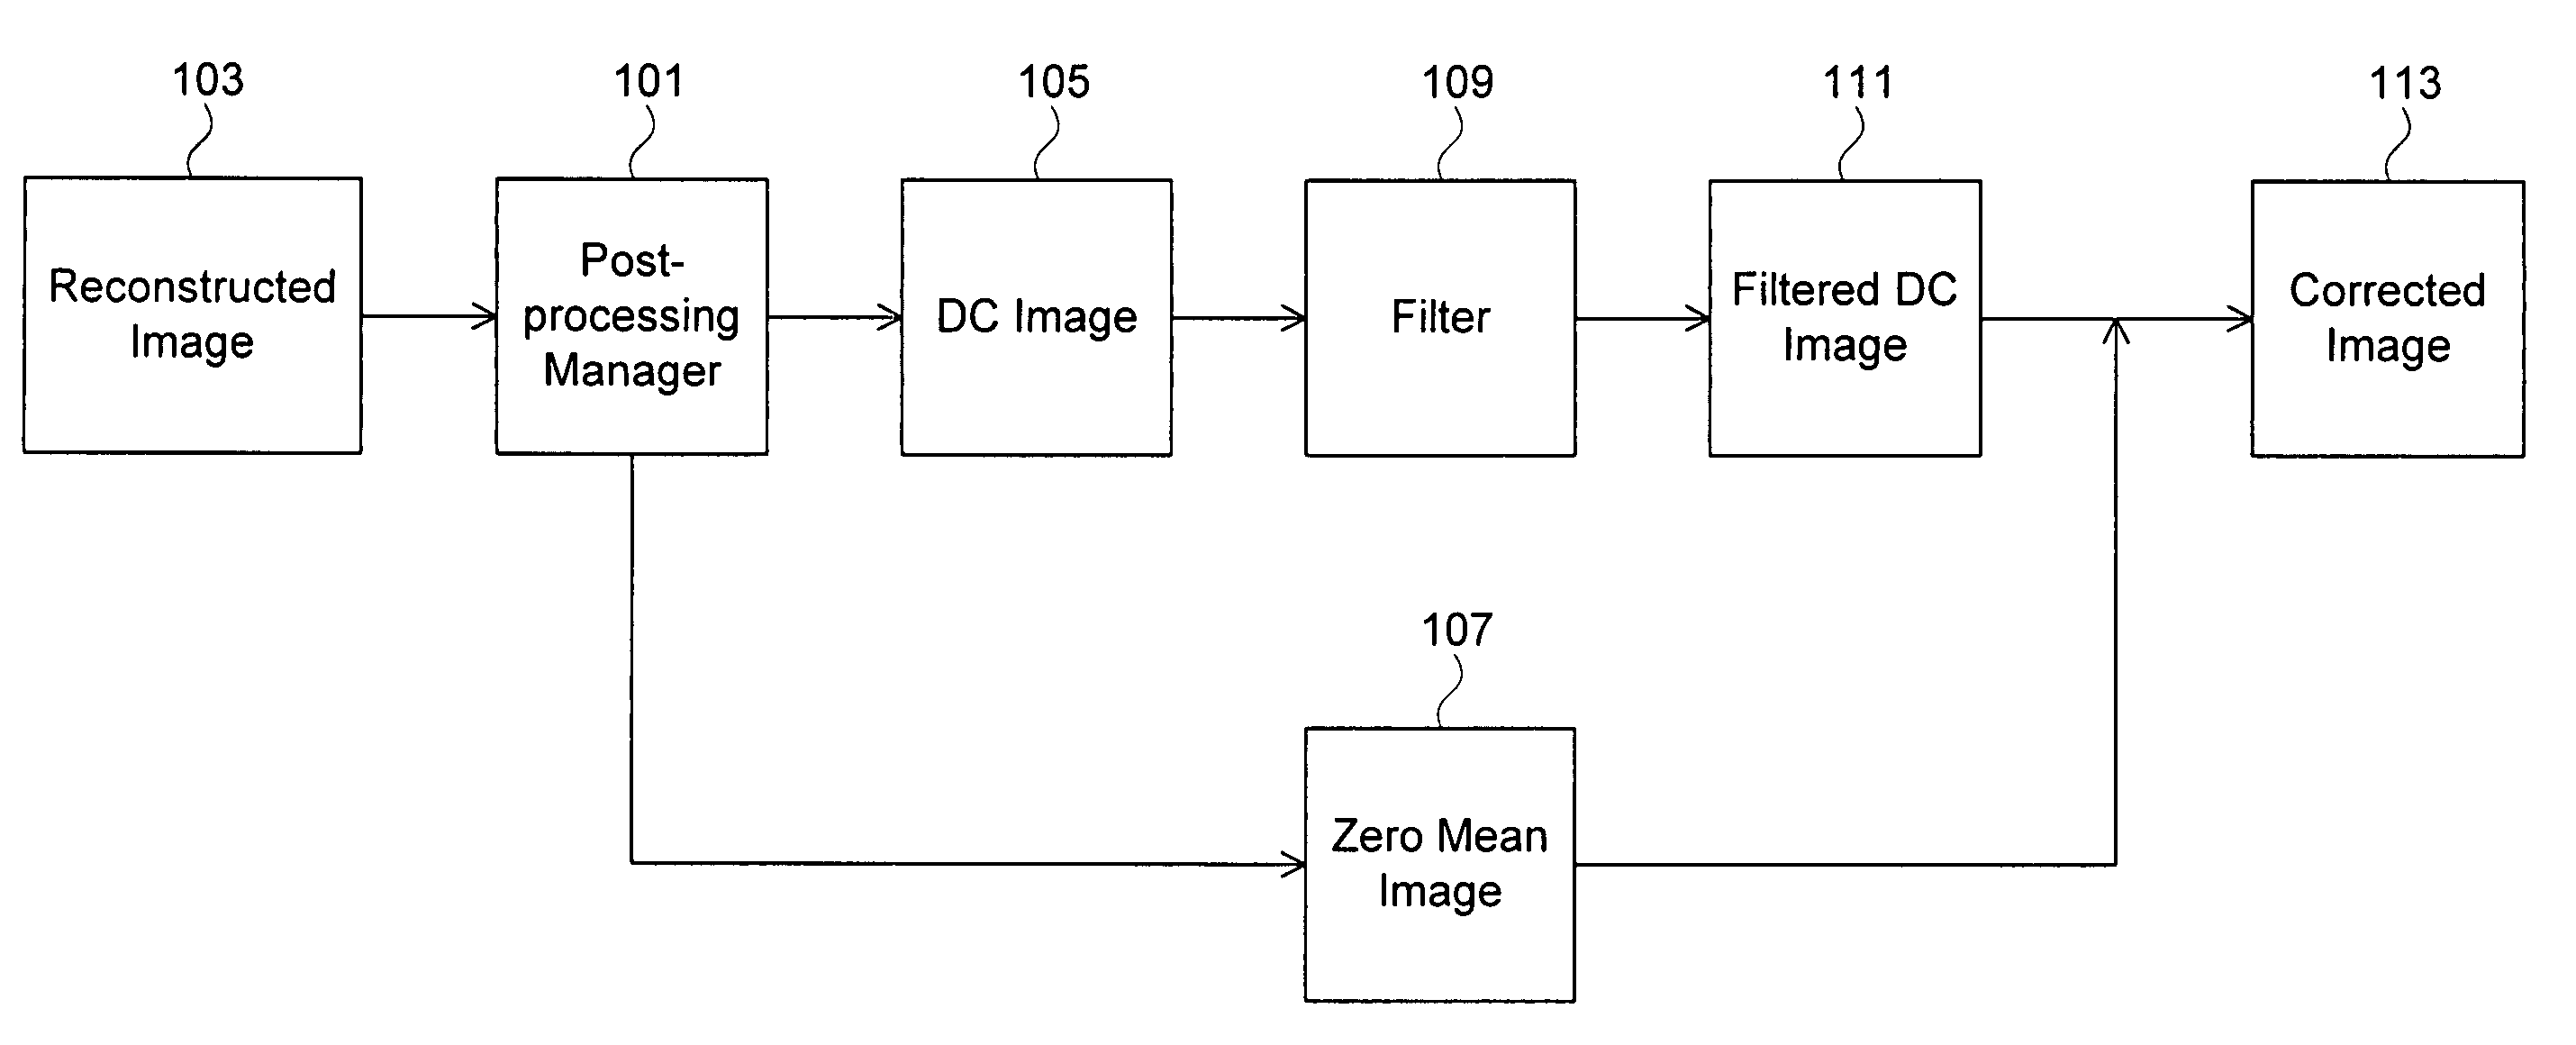 Reducing undesirable block based image processing artifacts by DC image filtering